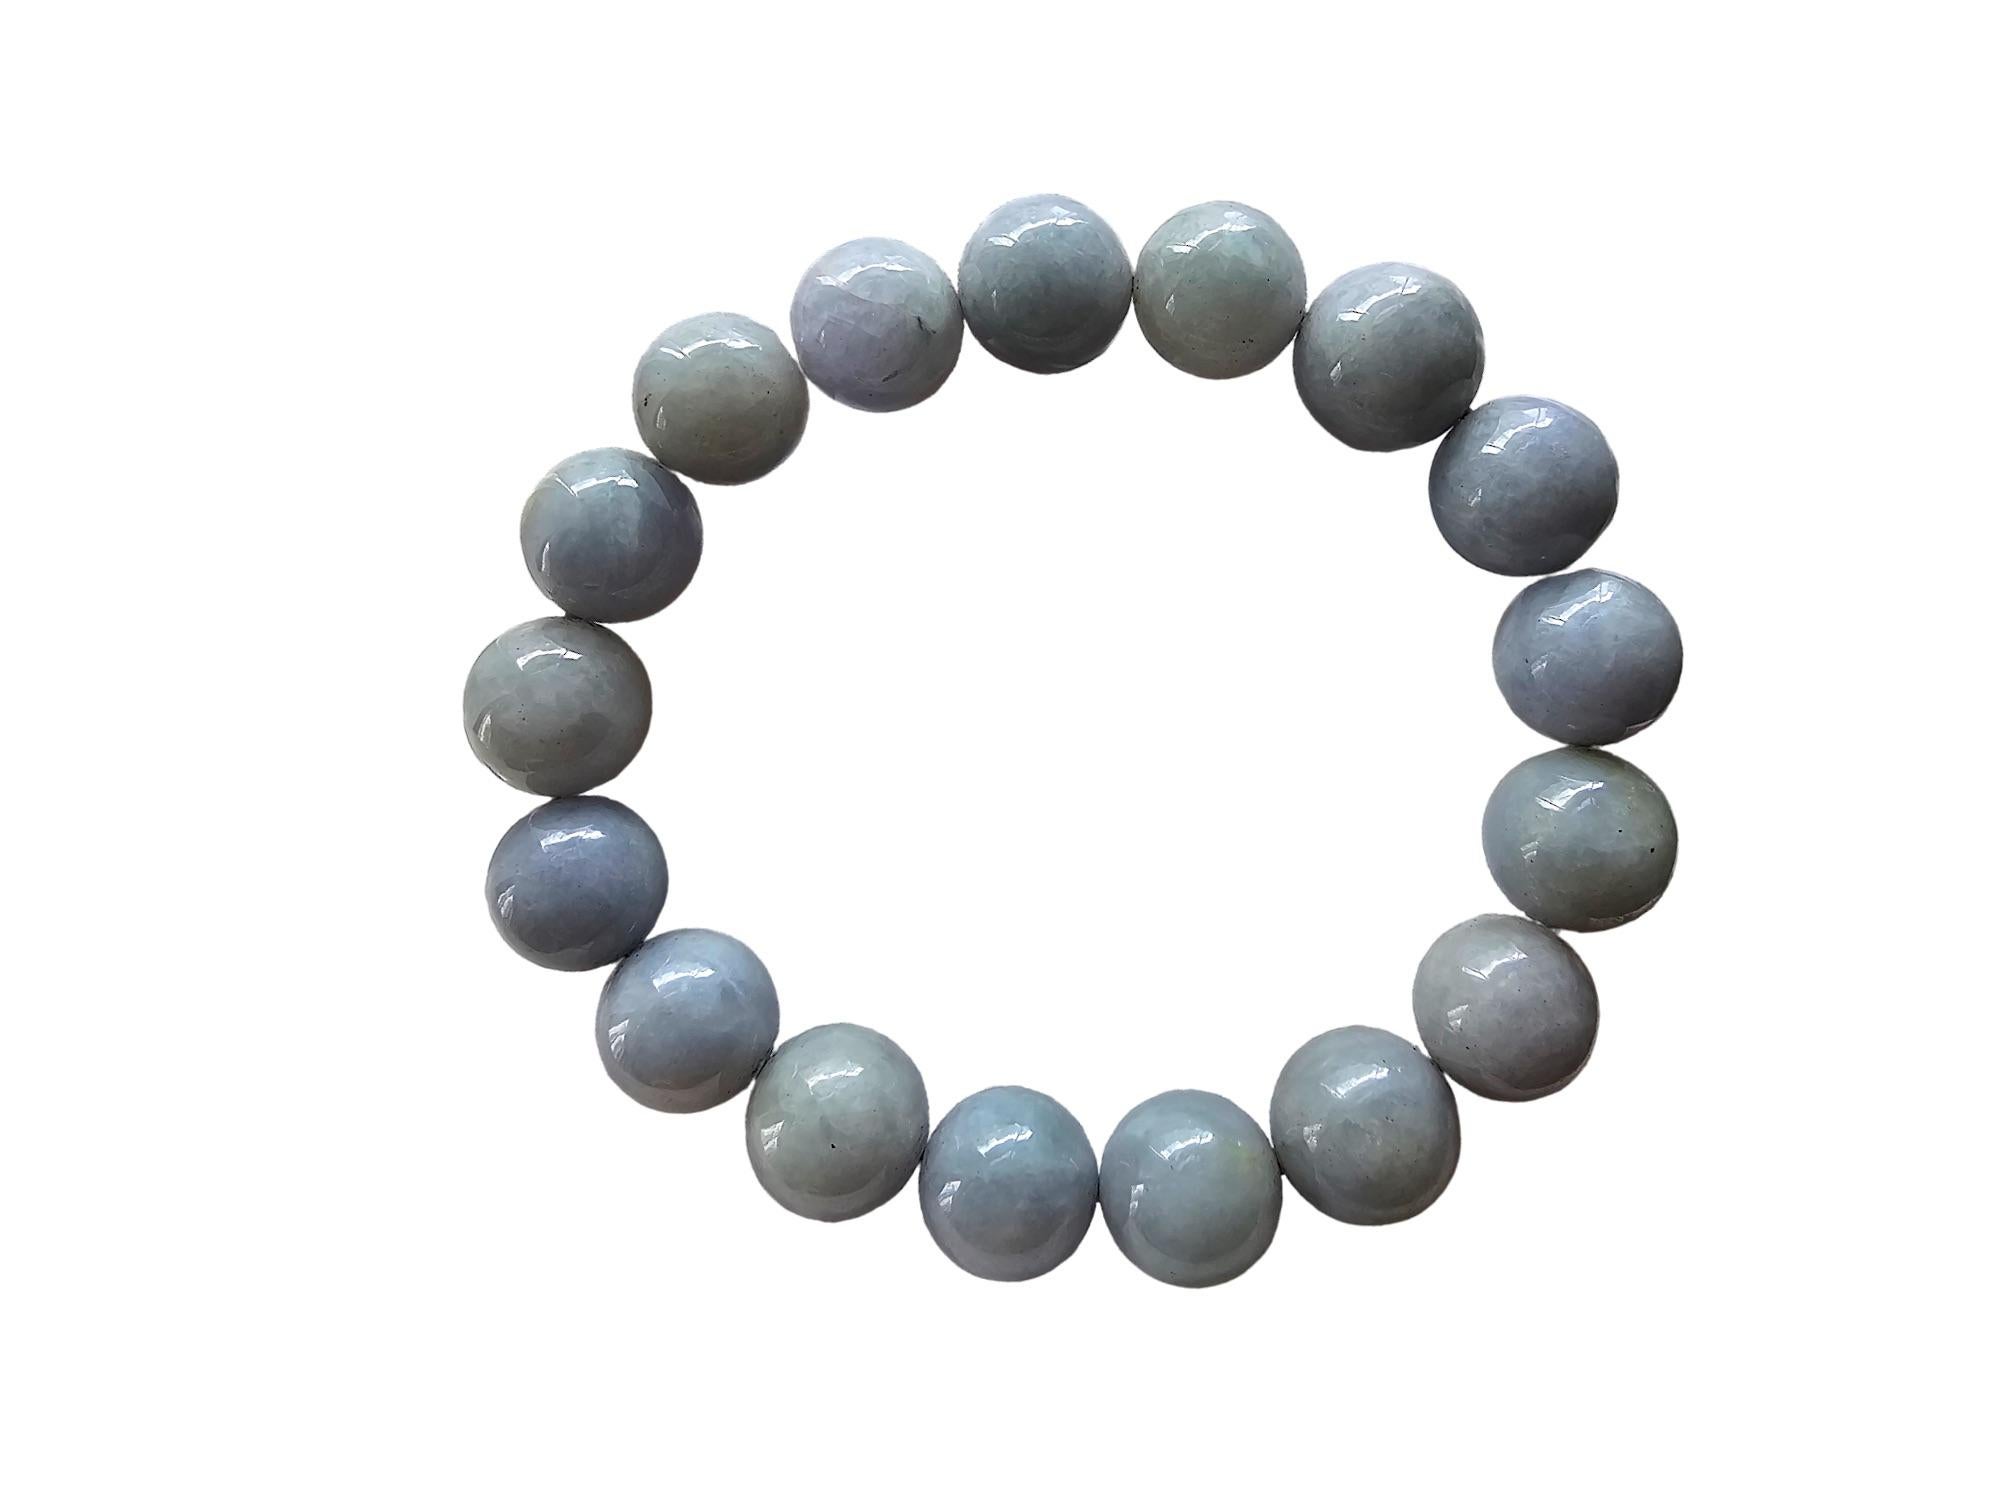 Imperial Purple and Green Lavender Burmese A-Jade Jadeite Beaded Bracelet (11-12mm Each x 17 beads) 06007

11-12 mm each, 17 perfectly calibrated Green and Lavender Jadeite Beads. Some of the rarest naturally occurring hues of Jadeite and superior